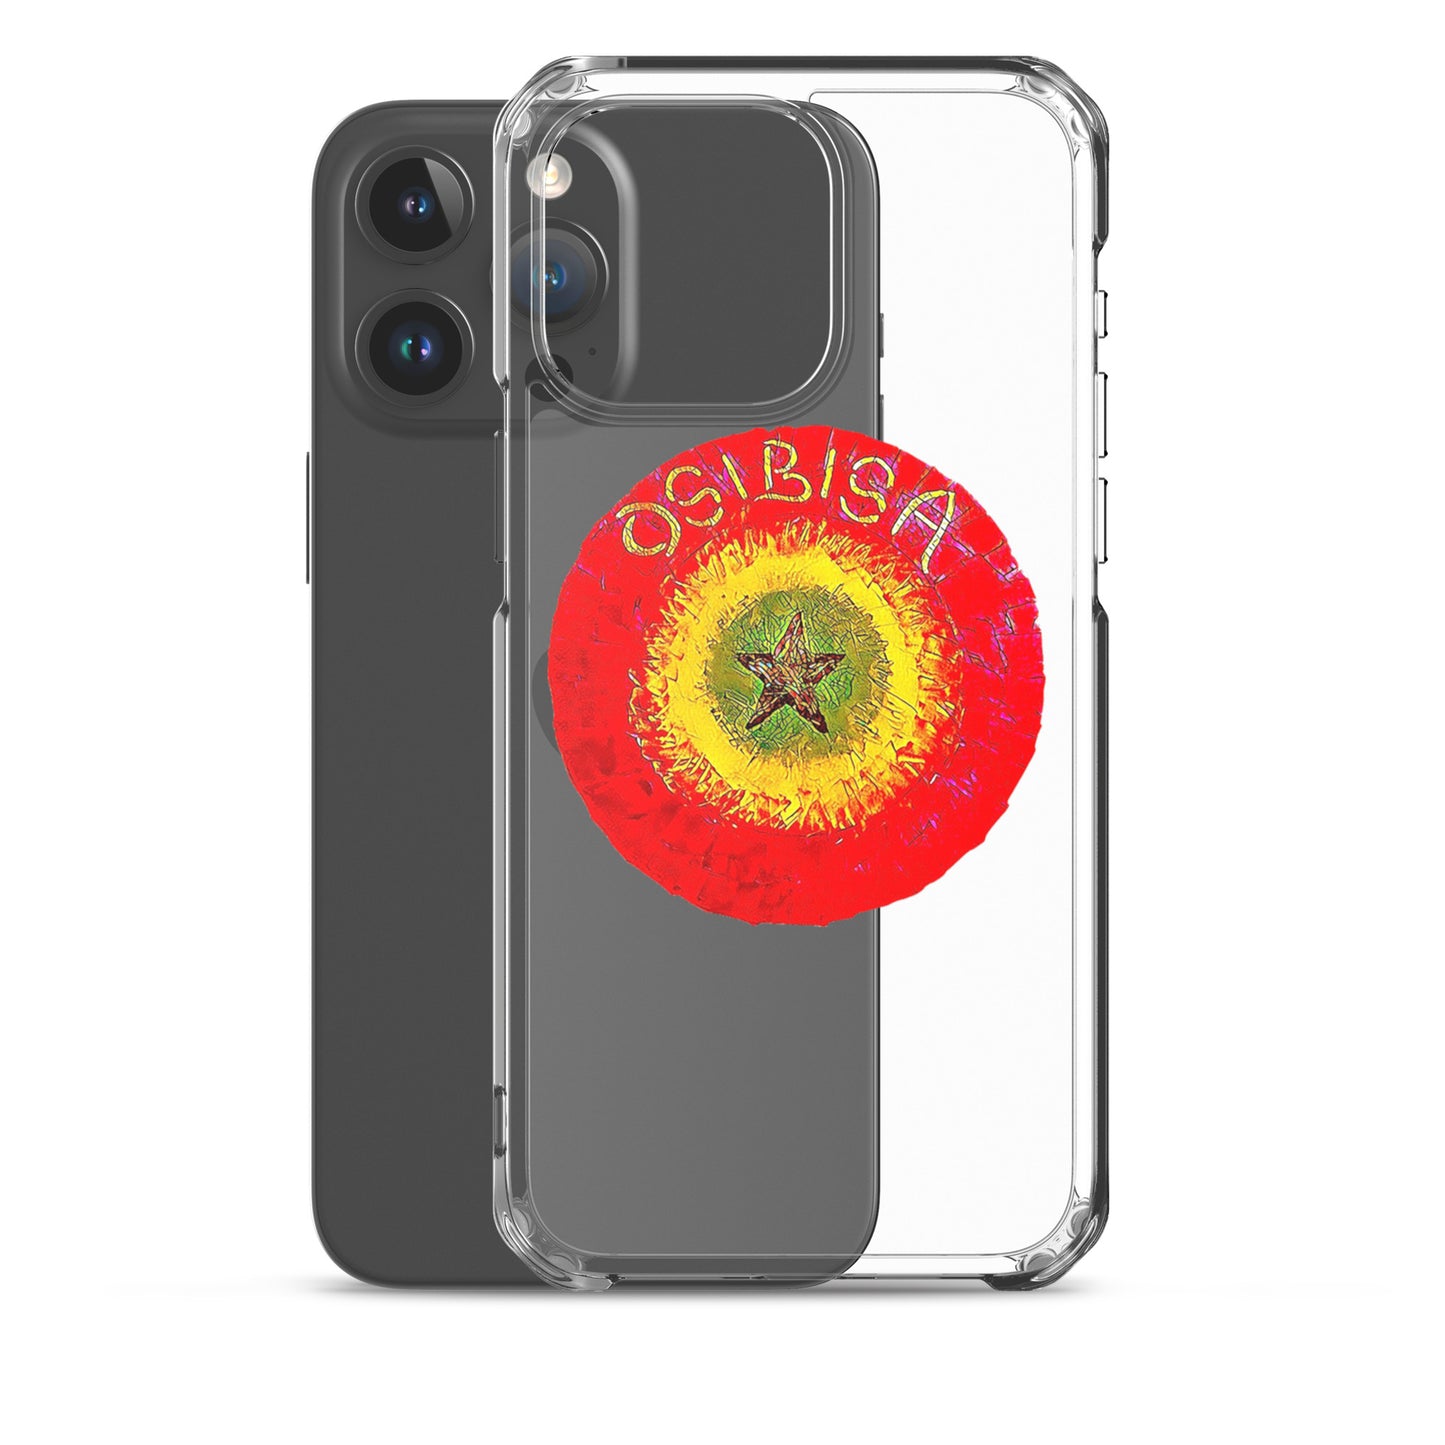 Osibisa iPhone Clear Case